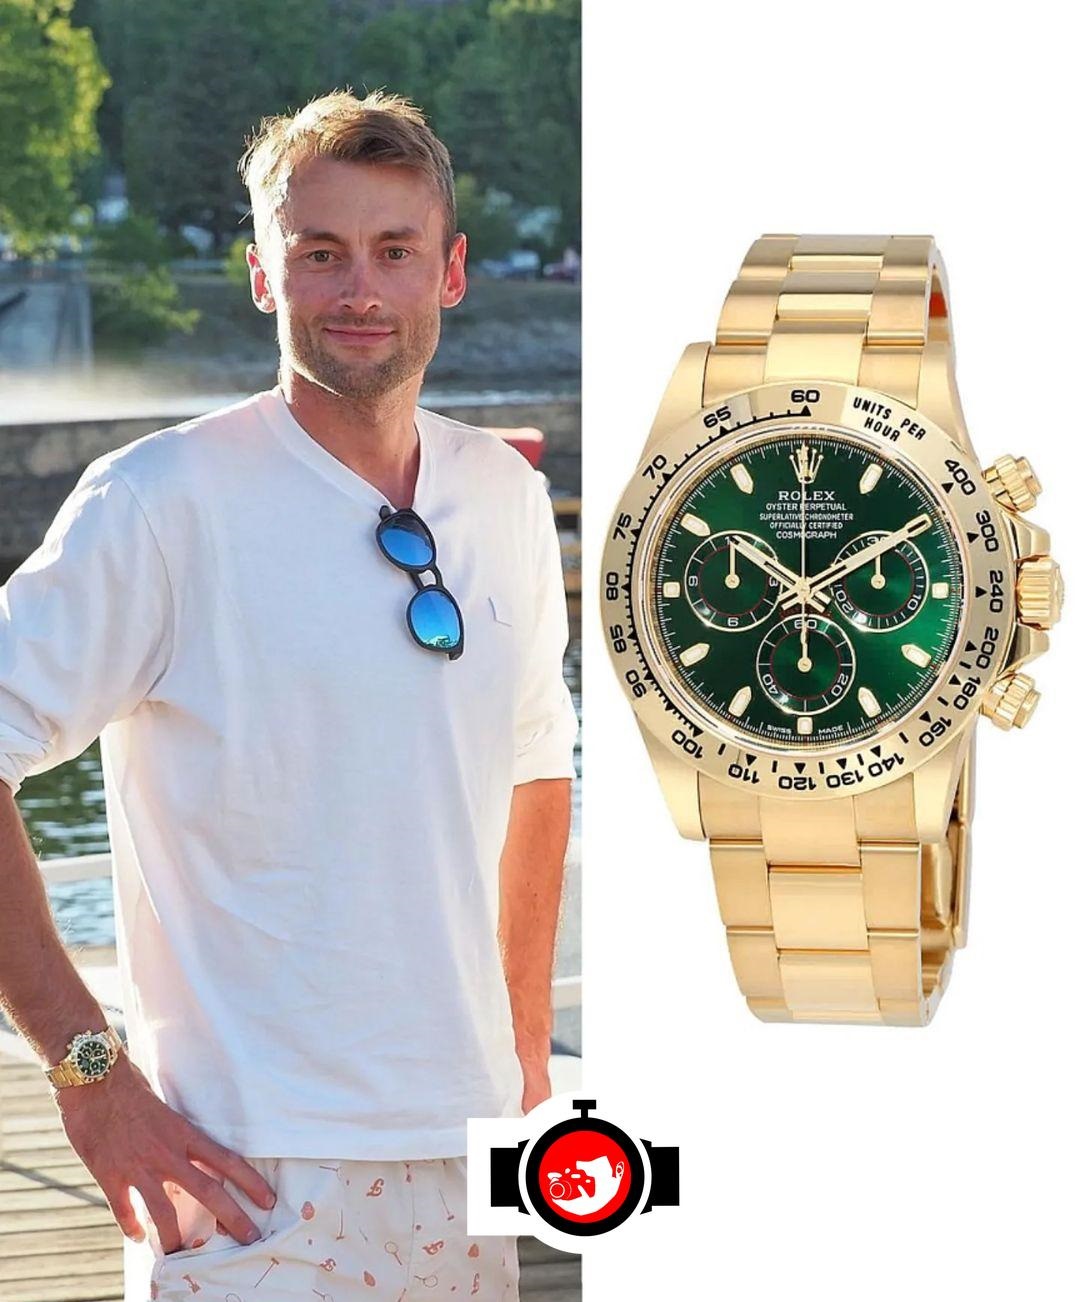 athlete Petter Northug spotted wearing a Rolex 